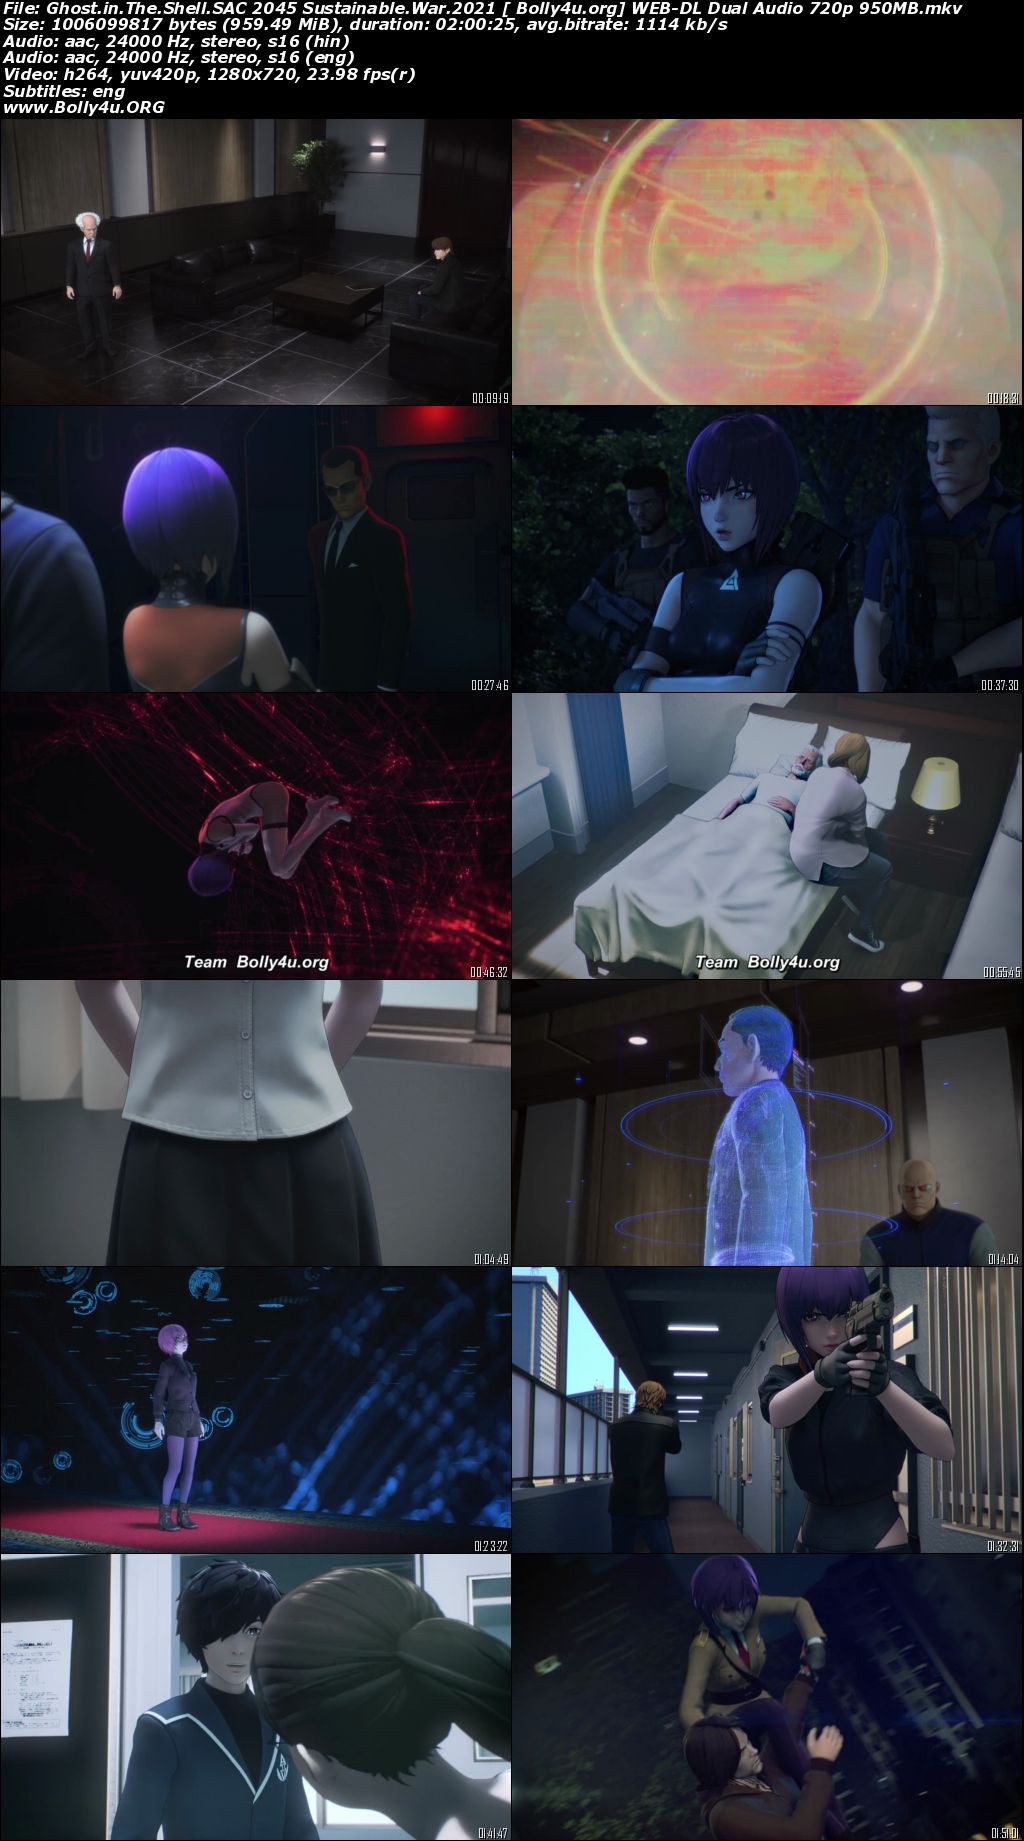 Ghost in The Shell SAC 2045 Sustainable War 2021 WEB-DL Hindi Dual Audio Download